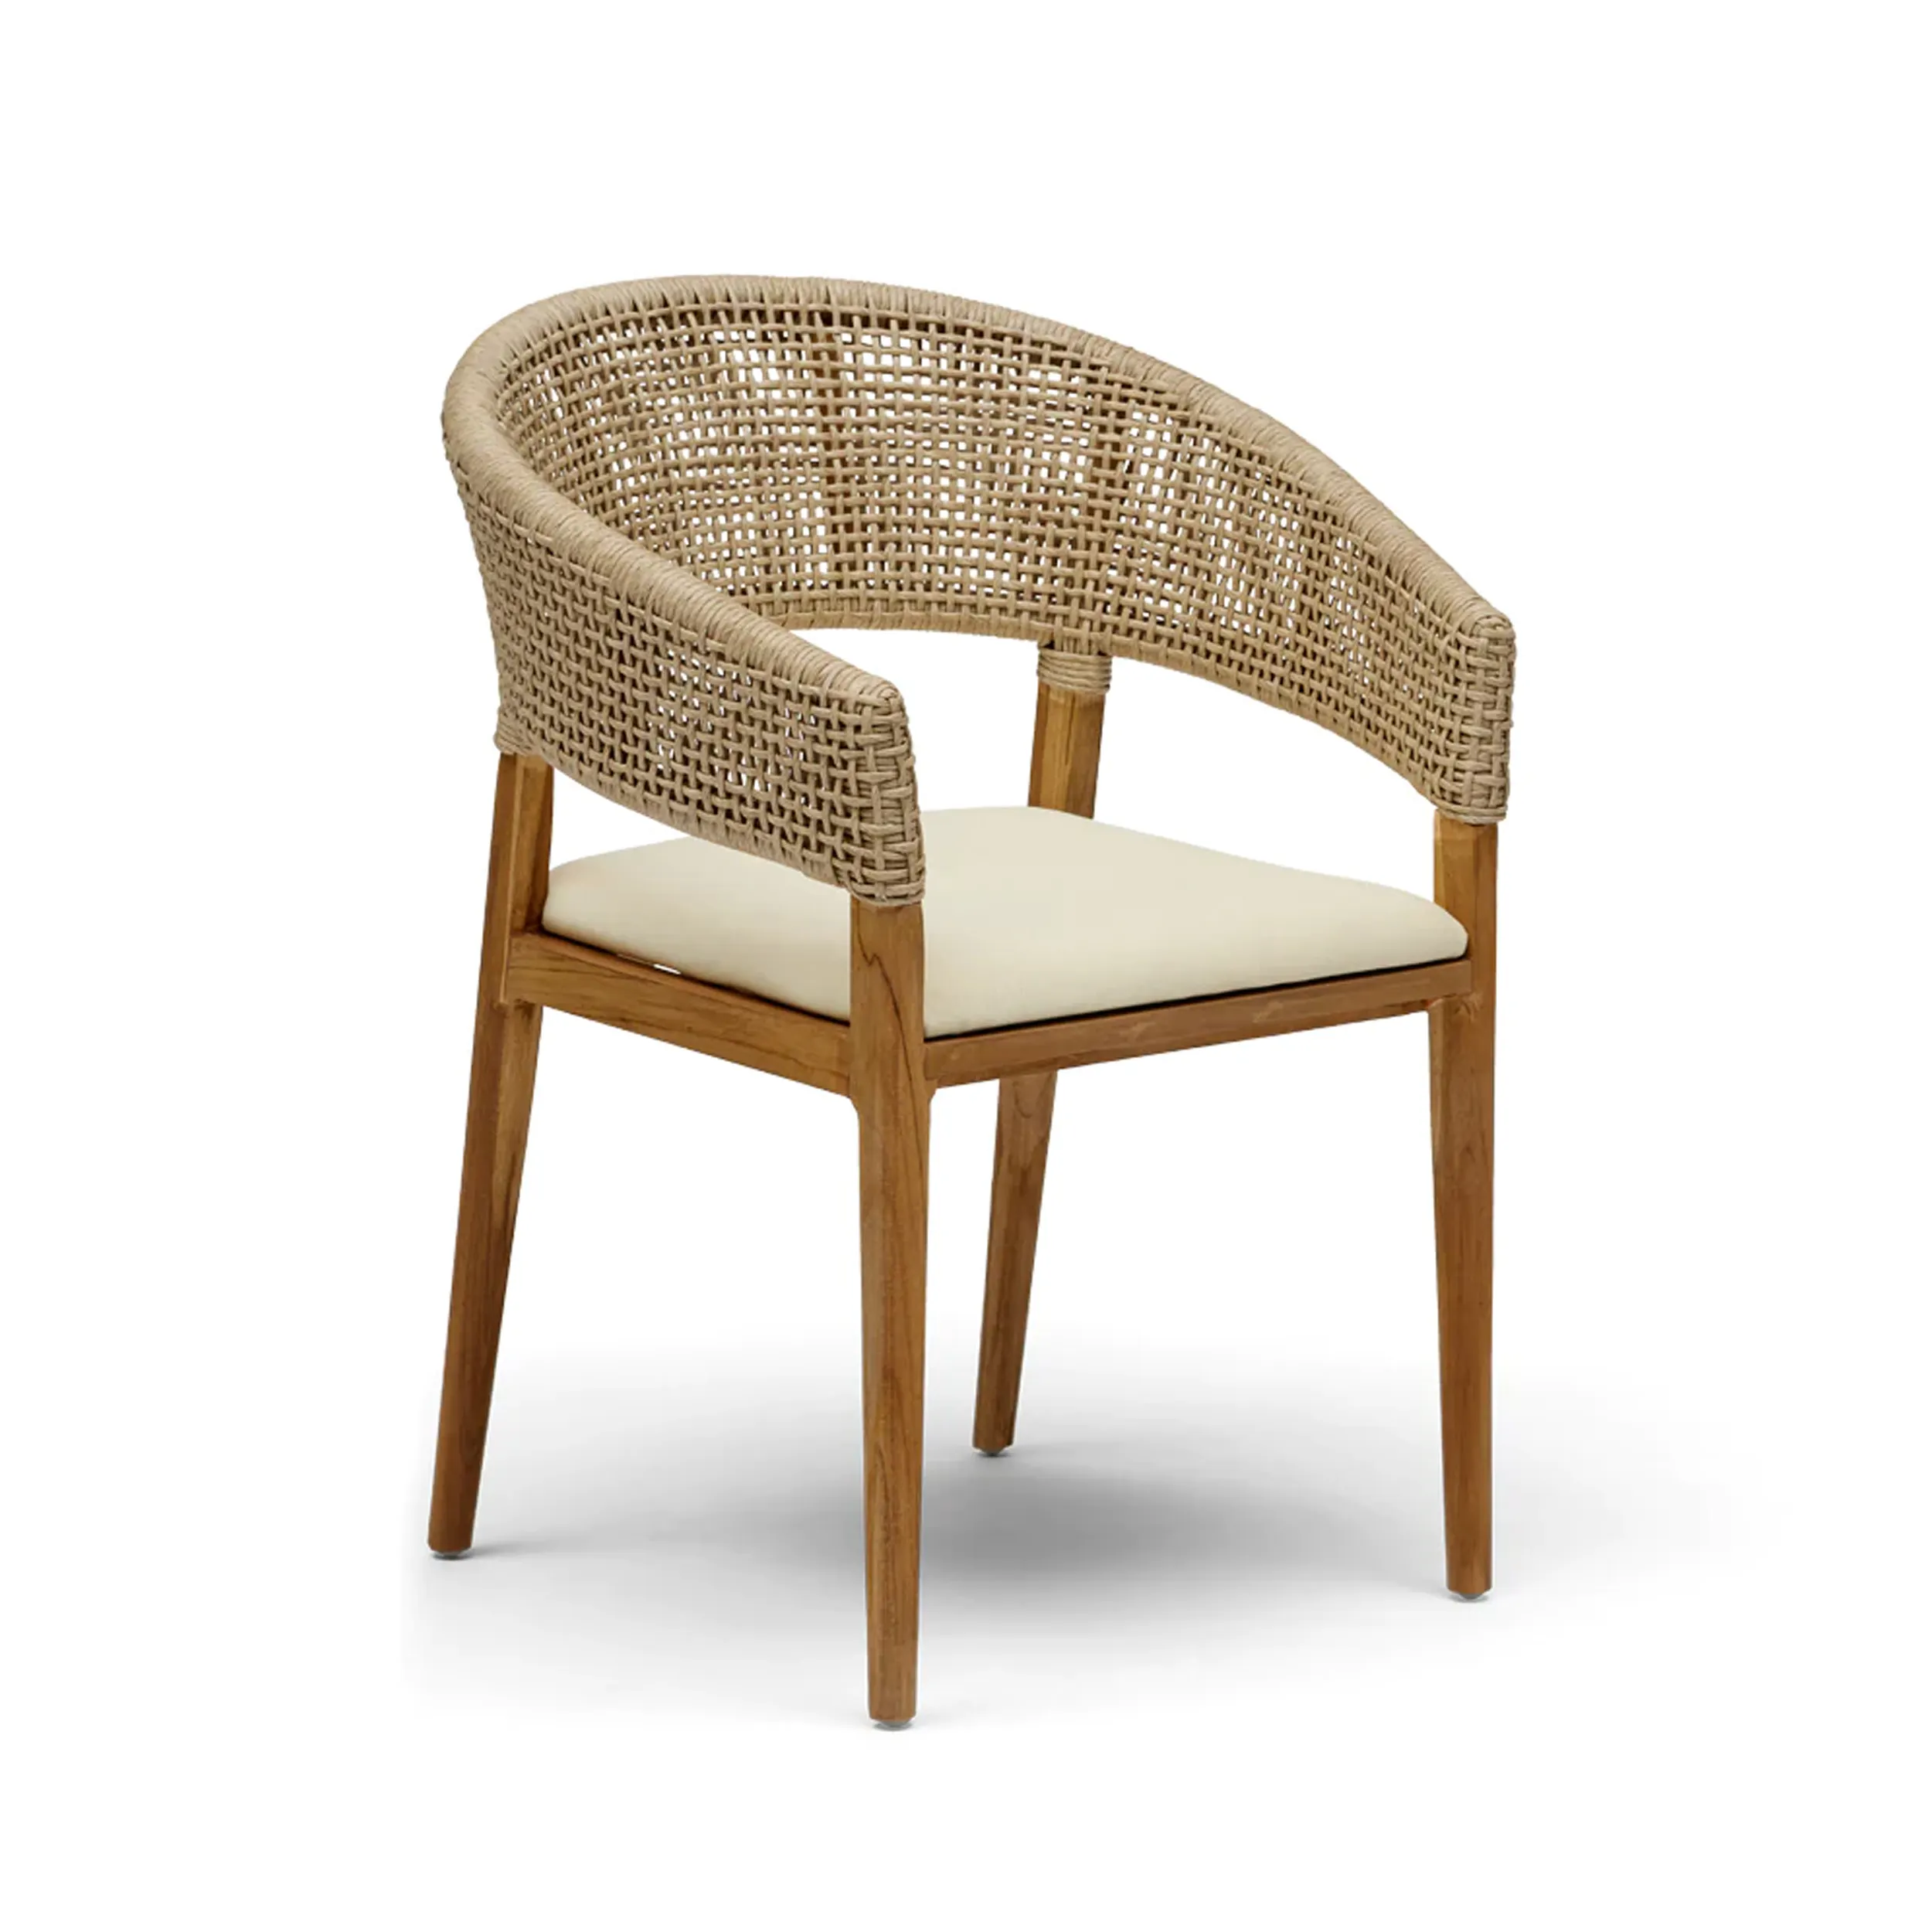 Dining Chair Teak Wood With Rattan Synthetic And Cushion Outdoor-Royal